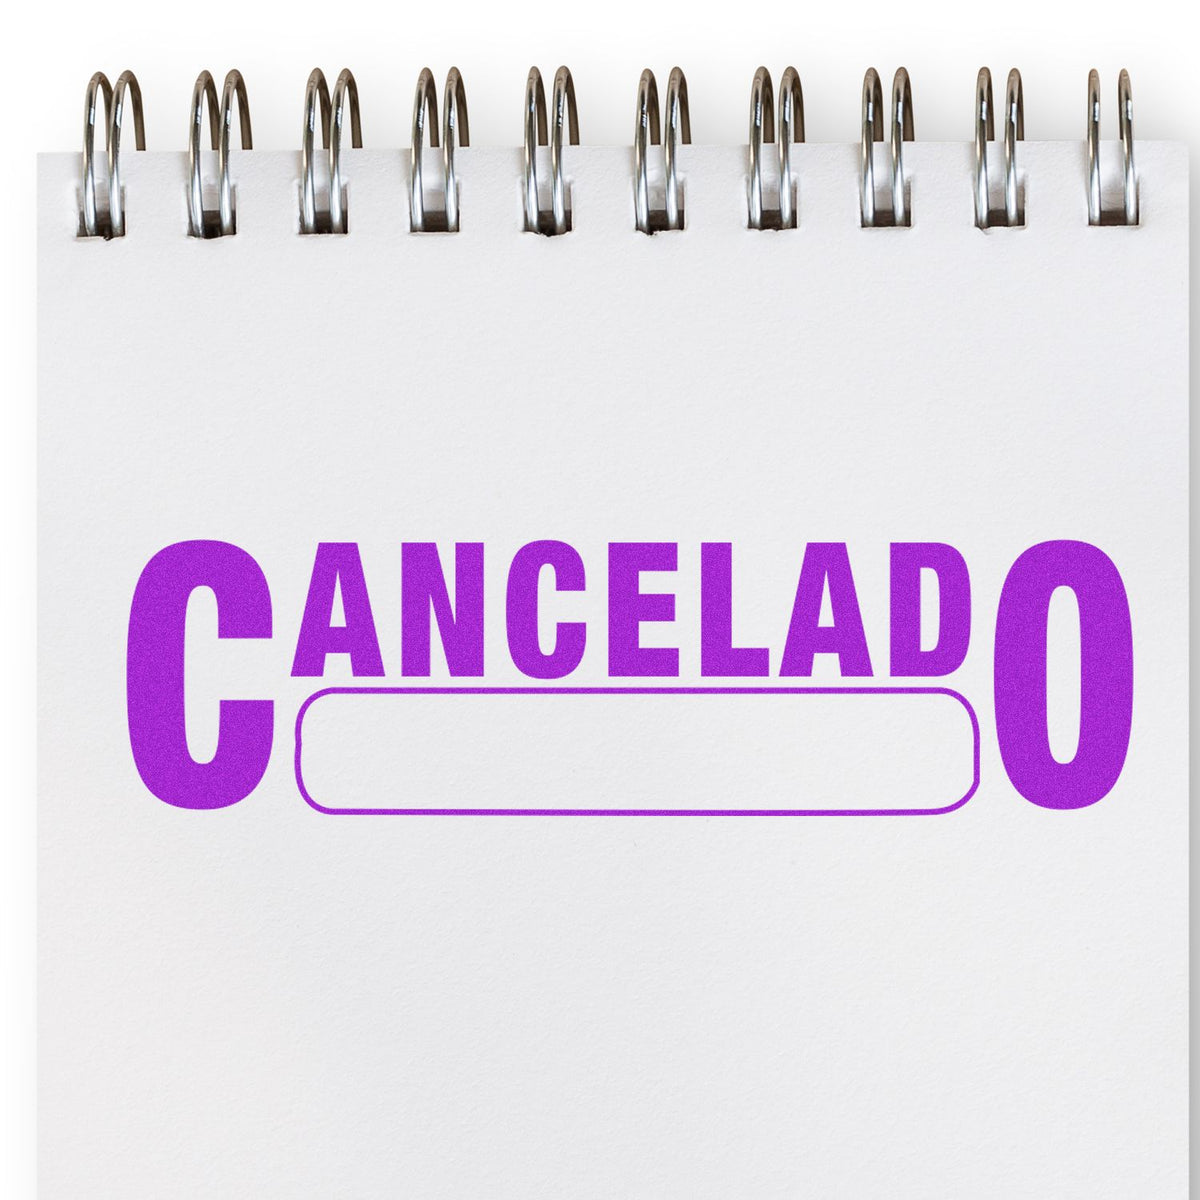 Large Cancelado with Box Rubber Stamp In Use